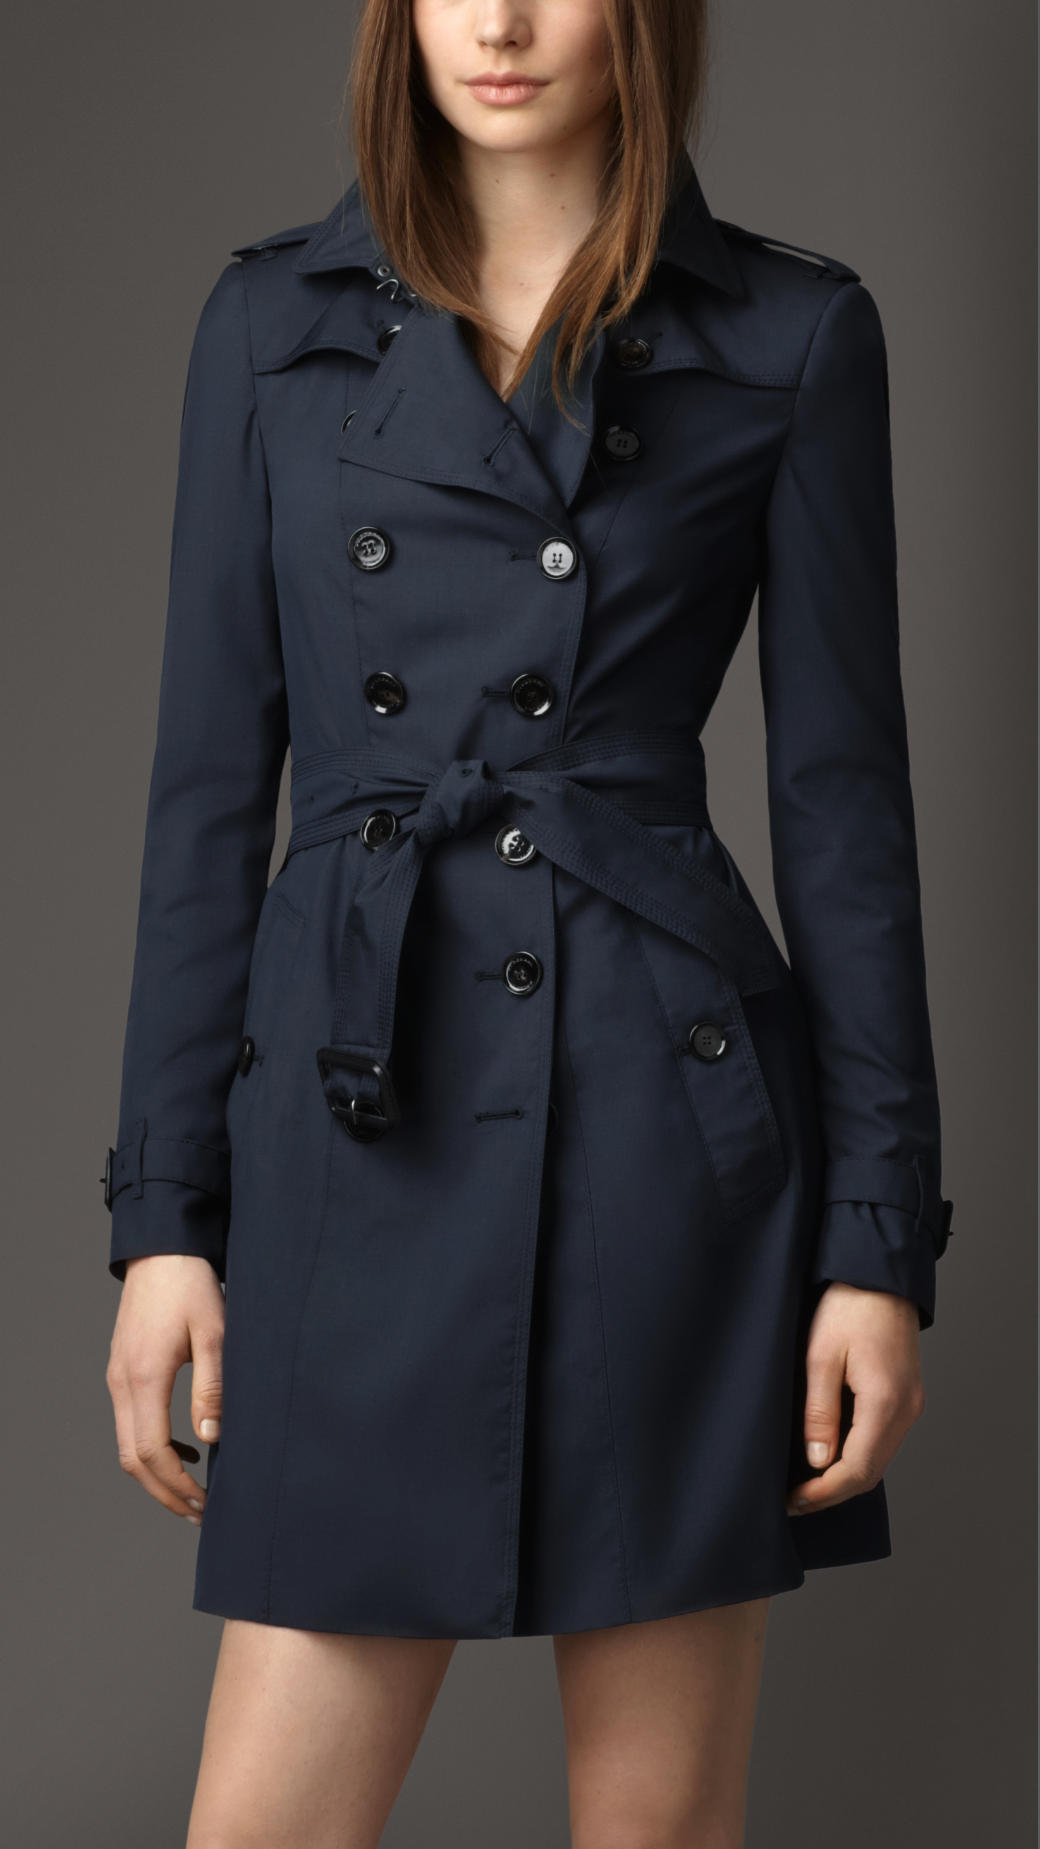 Lyst Burberry Wool Silk Trench Coat in Blue